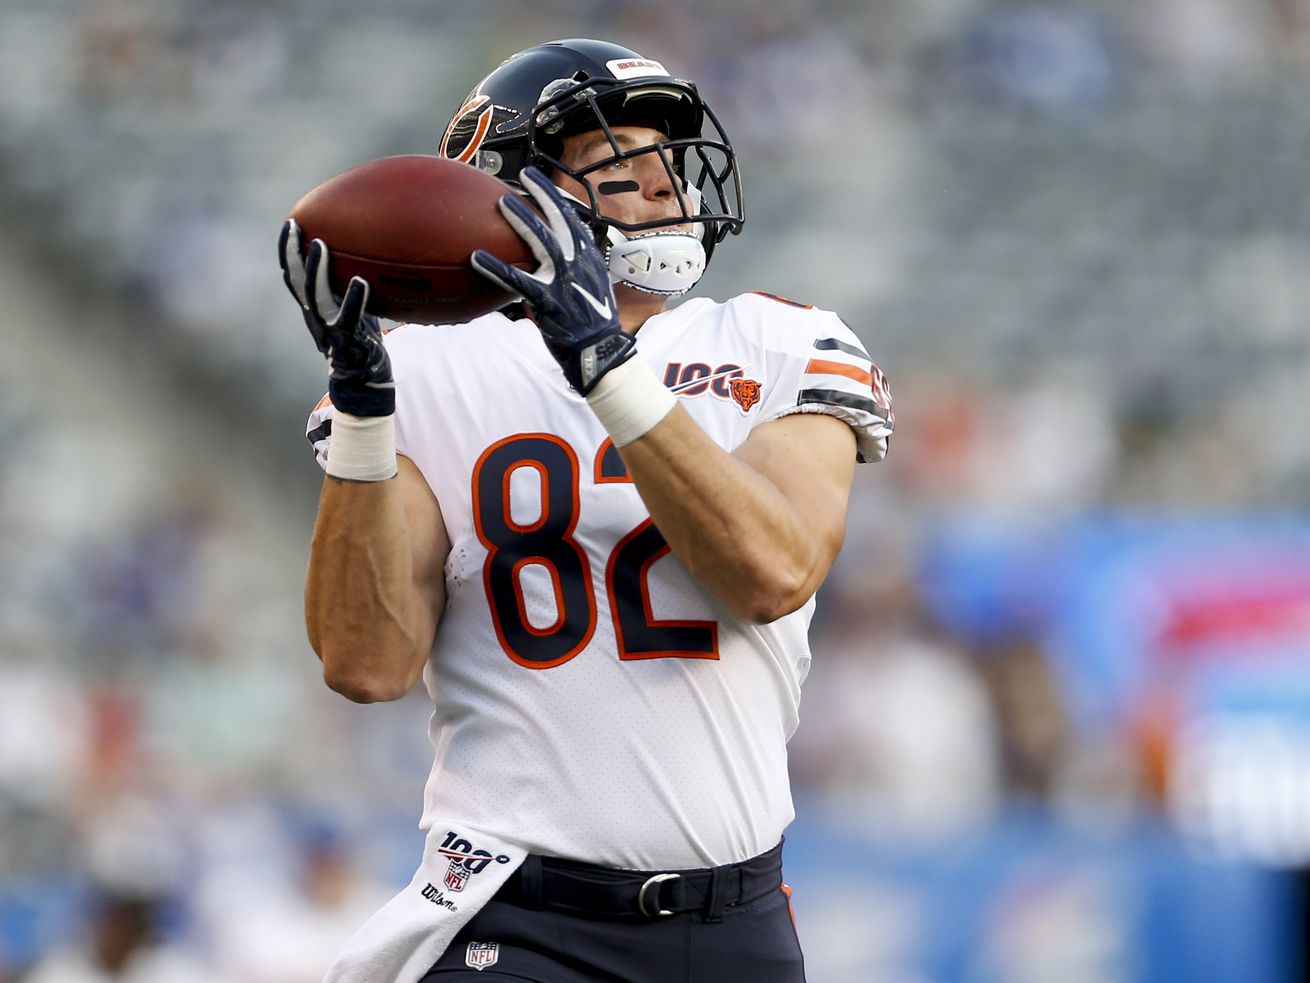 Chicago Bears tight end Ben Braunecker (82) warms up before an NFL football game against the New York Giants, Friday, Aug. 16, 2019, in East Rutherford, N.J. (AP Photo/Adam Hunger) ORG XMIT: ERU